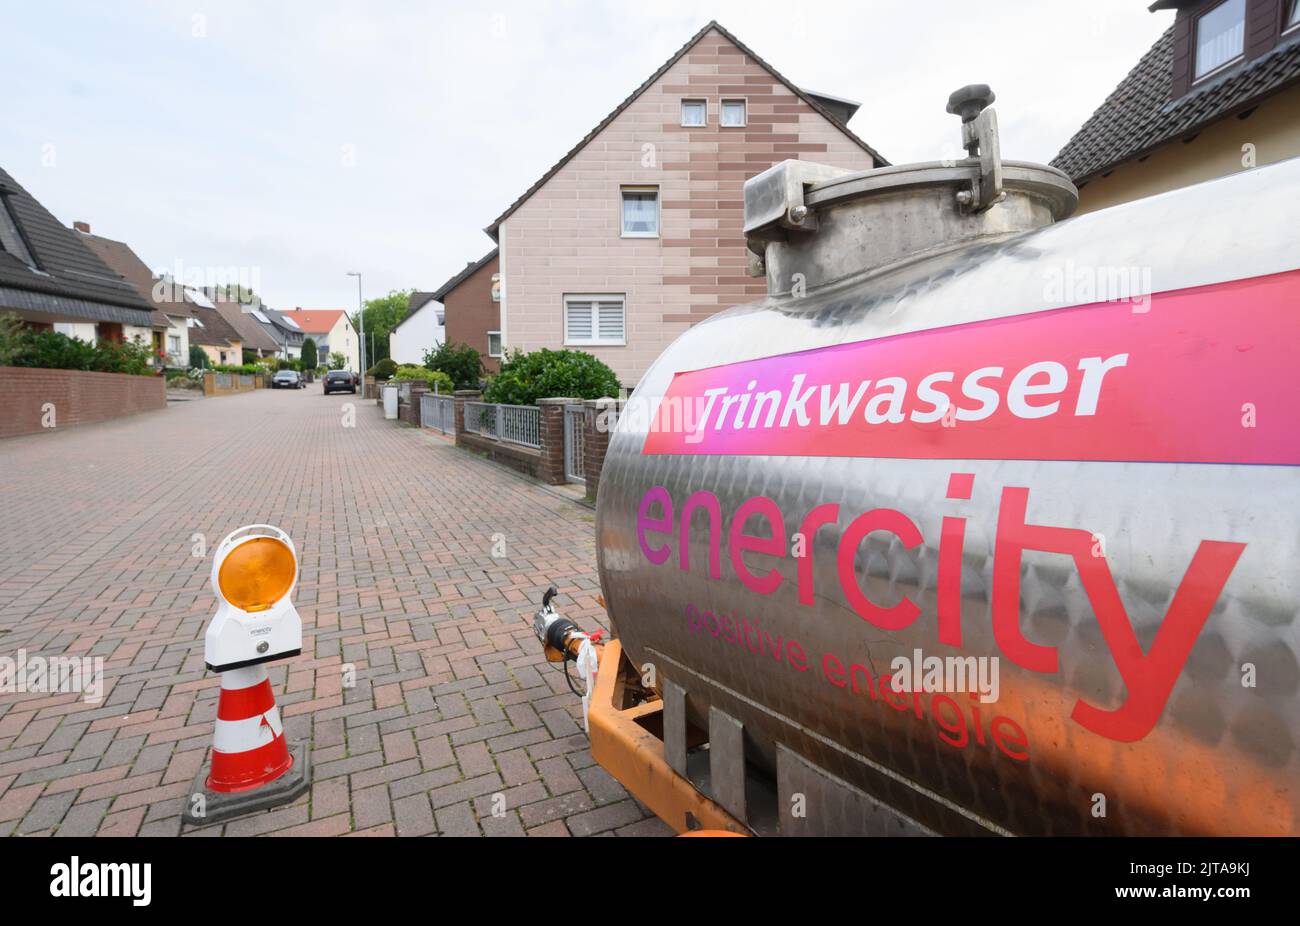 Laatzen, Germany. 29th Aug, 2022. A 'Drinking water' sign is stuck on a tank at a water intake point. Following the contamination of drinking water in the district of Gleidingen near Hanover, the public health department and an external expert are deciding how to proceed. The water supplier Enercity has filed charges against unknown persons. It is strongly assumed that the contamination was caused by a third party. Credit: Julian Stratenschulte/dpa/Alamy Live News Stock Photo